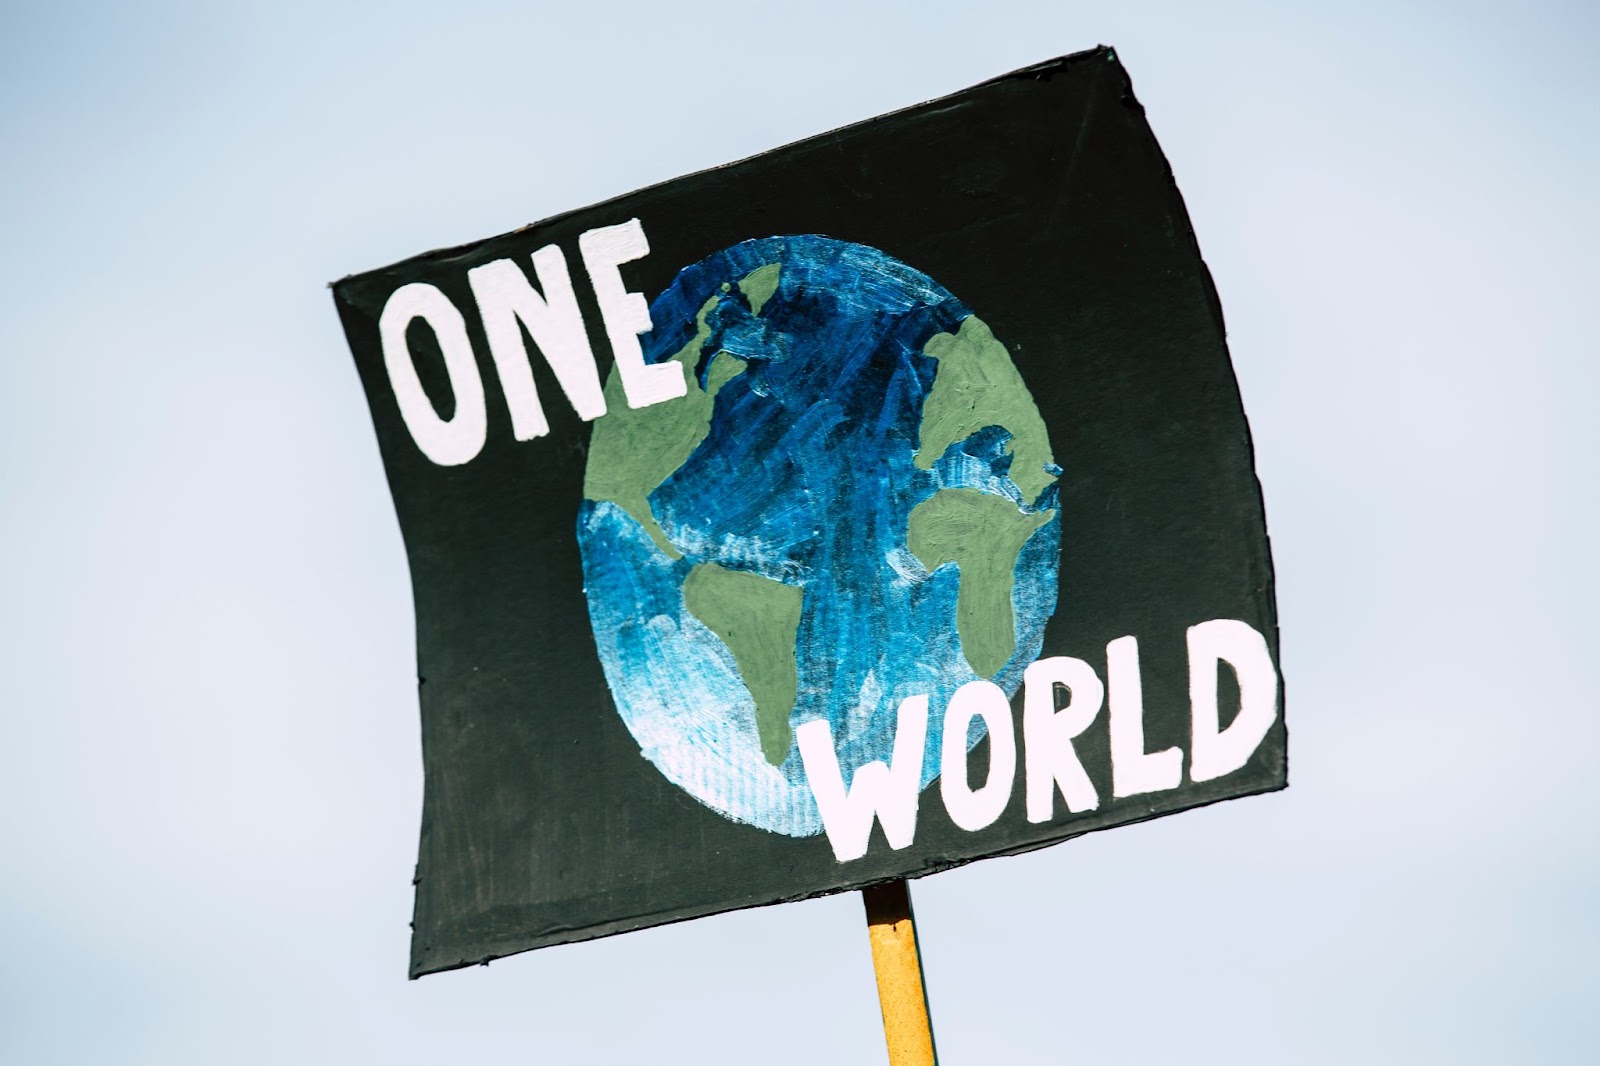 We only have one earth - Photo from Unsplash Website